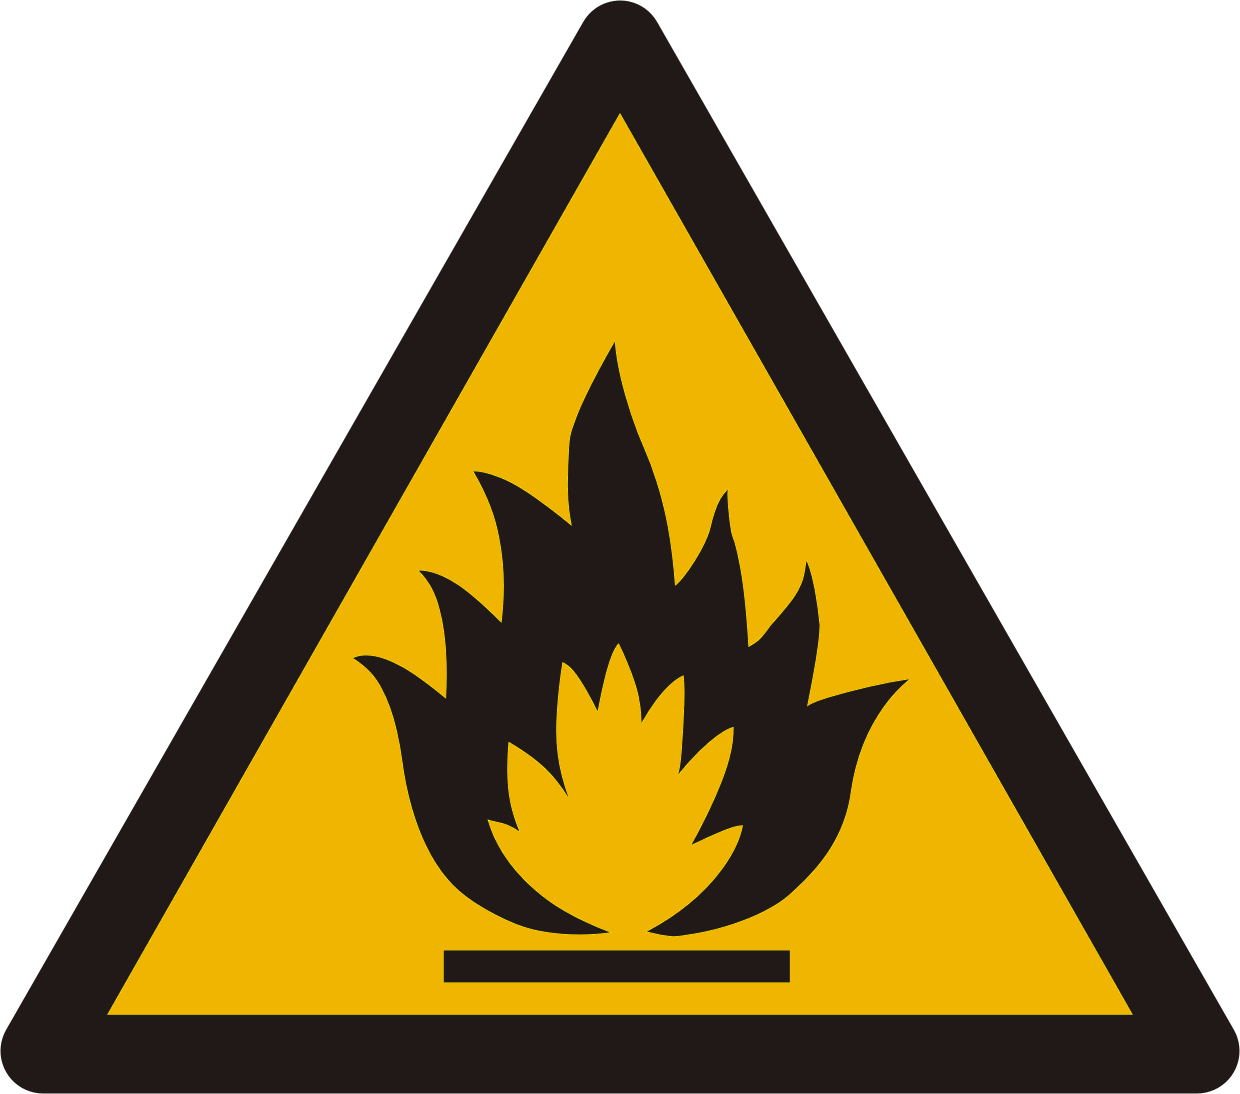 22 Flammable Logo Free Cliparts That You Can Download To You Computer